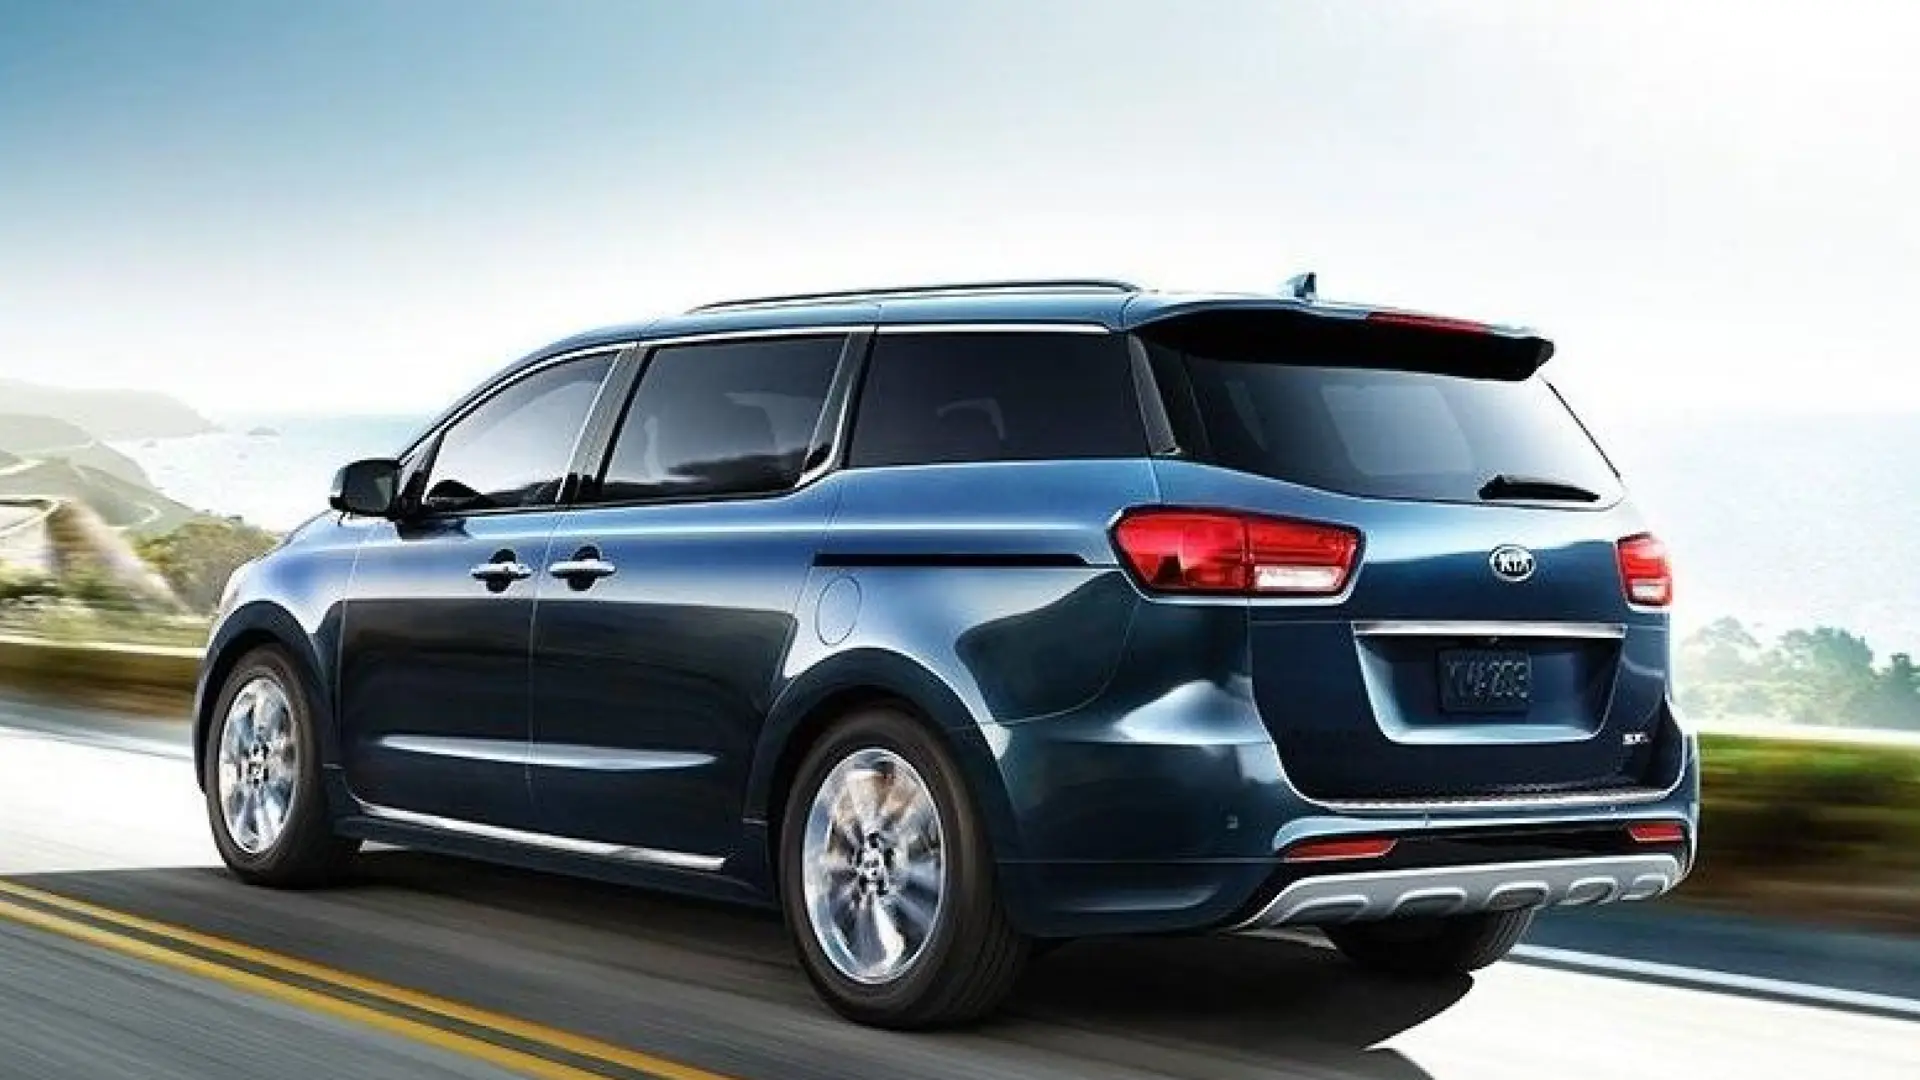 2019 Kia Carnival pricing and specs - Drive